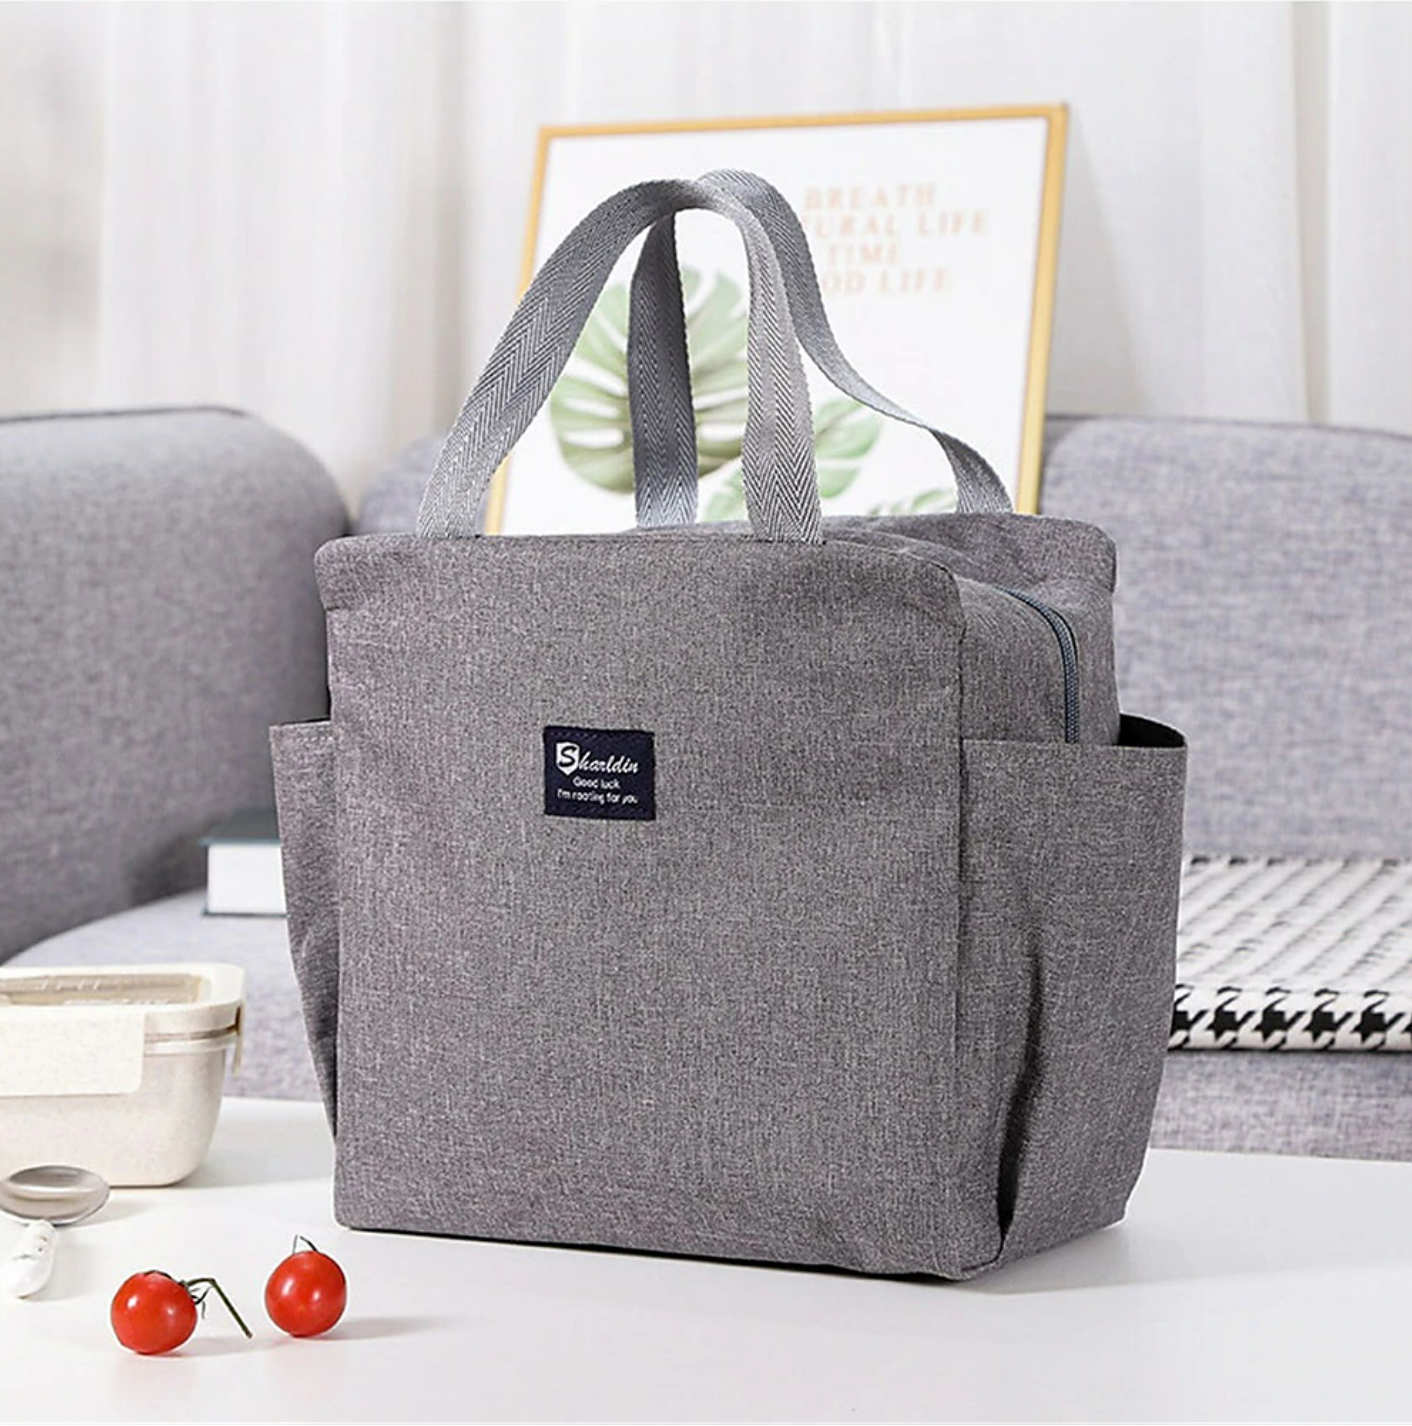 Leakproof Insulated Lunch Tote Bag Durable Reusable lunch Box Container for Women/Men/Picnic/Work/Travel/Hiking/Camping